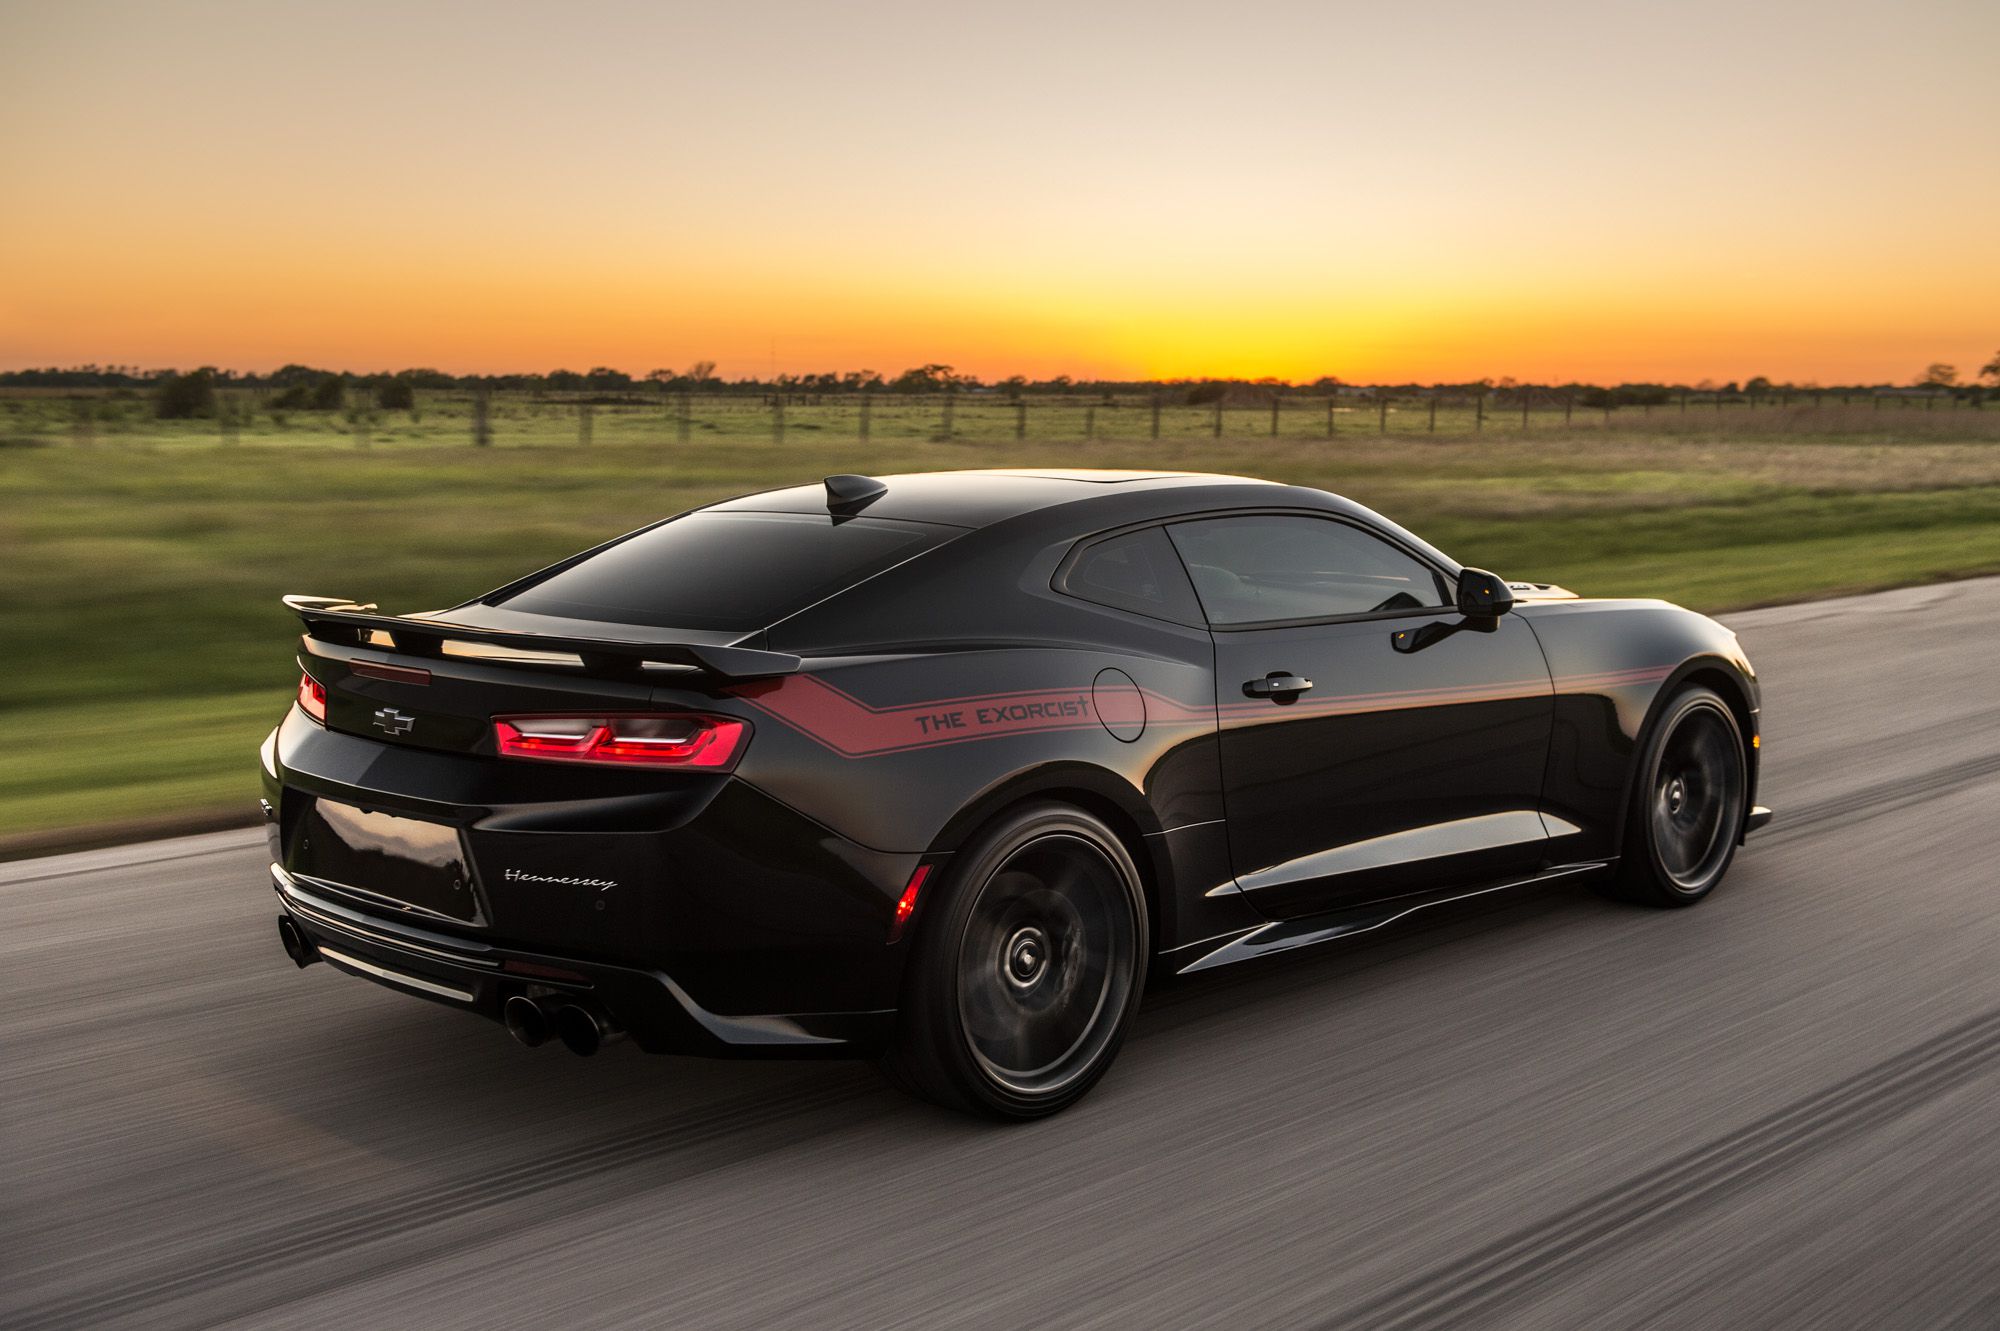 Side and rear view of a Hennessey Exorcist Camaro driving down the road